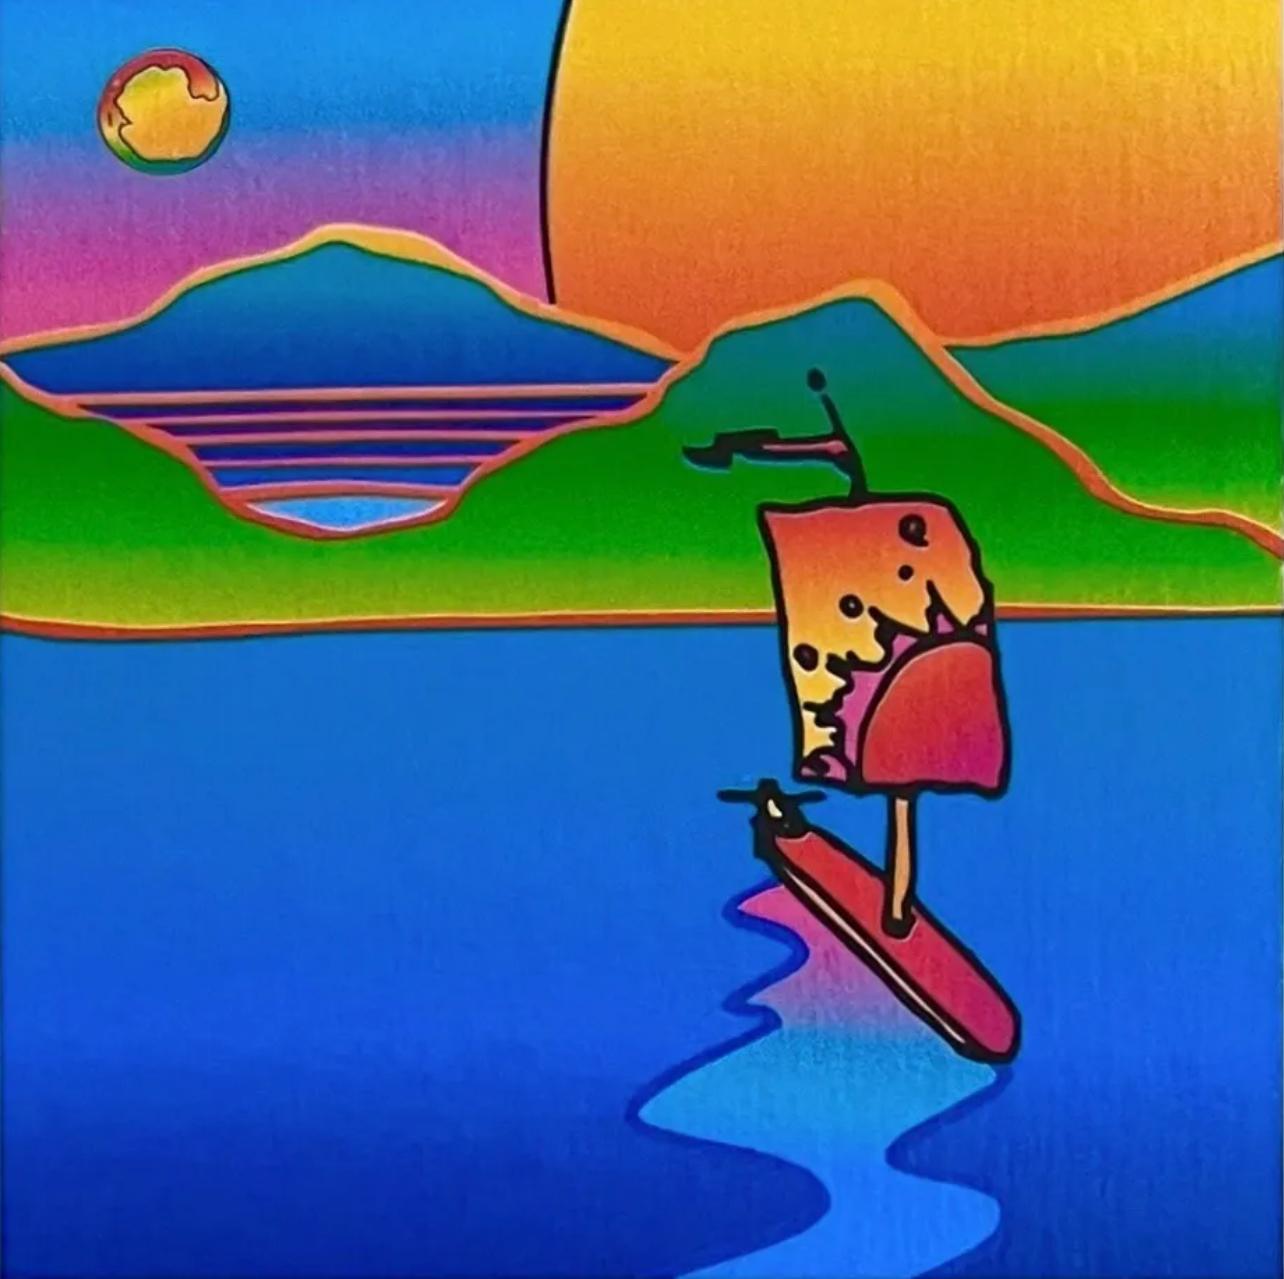 What kind of art does Peter Max do?